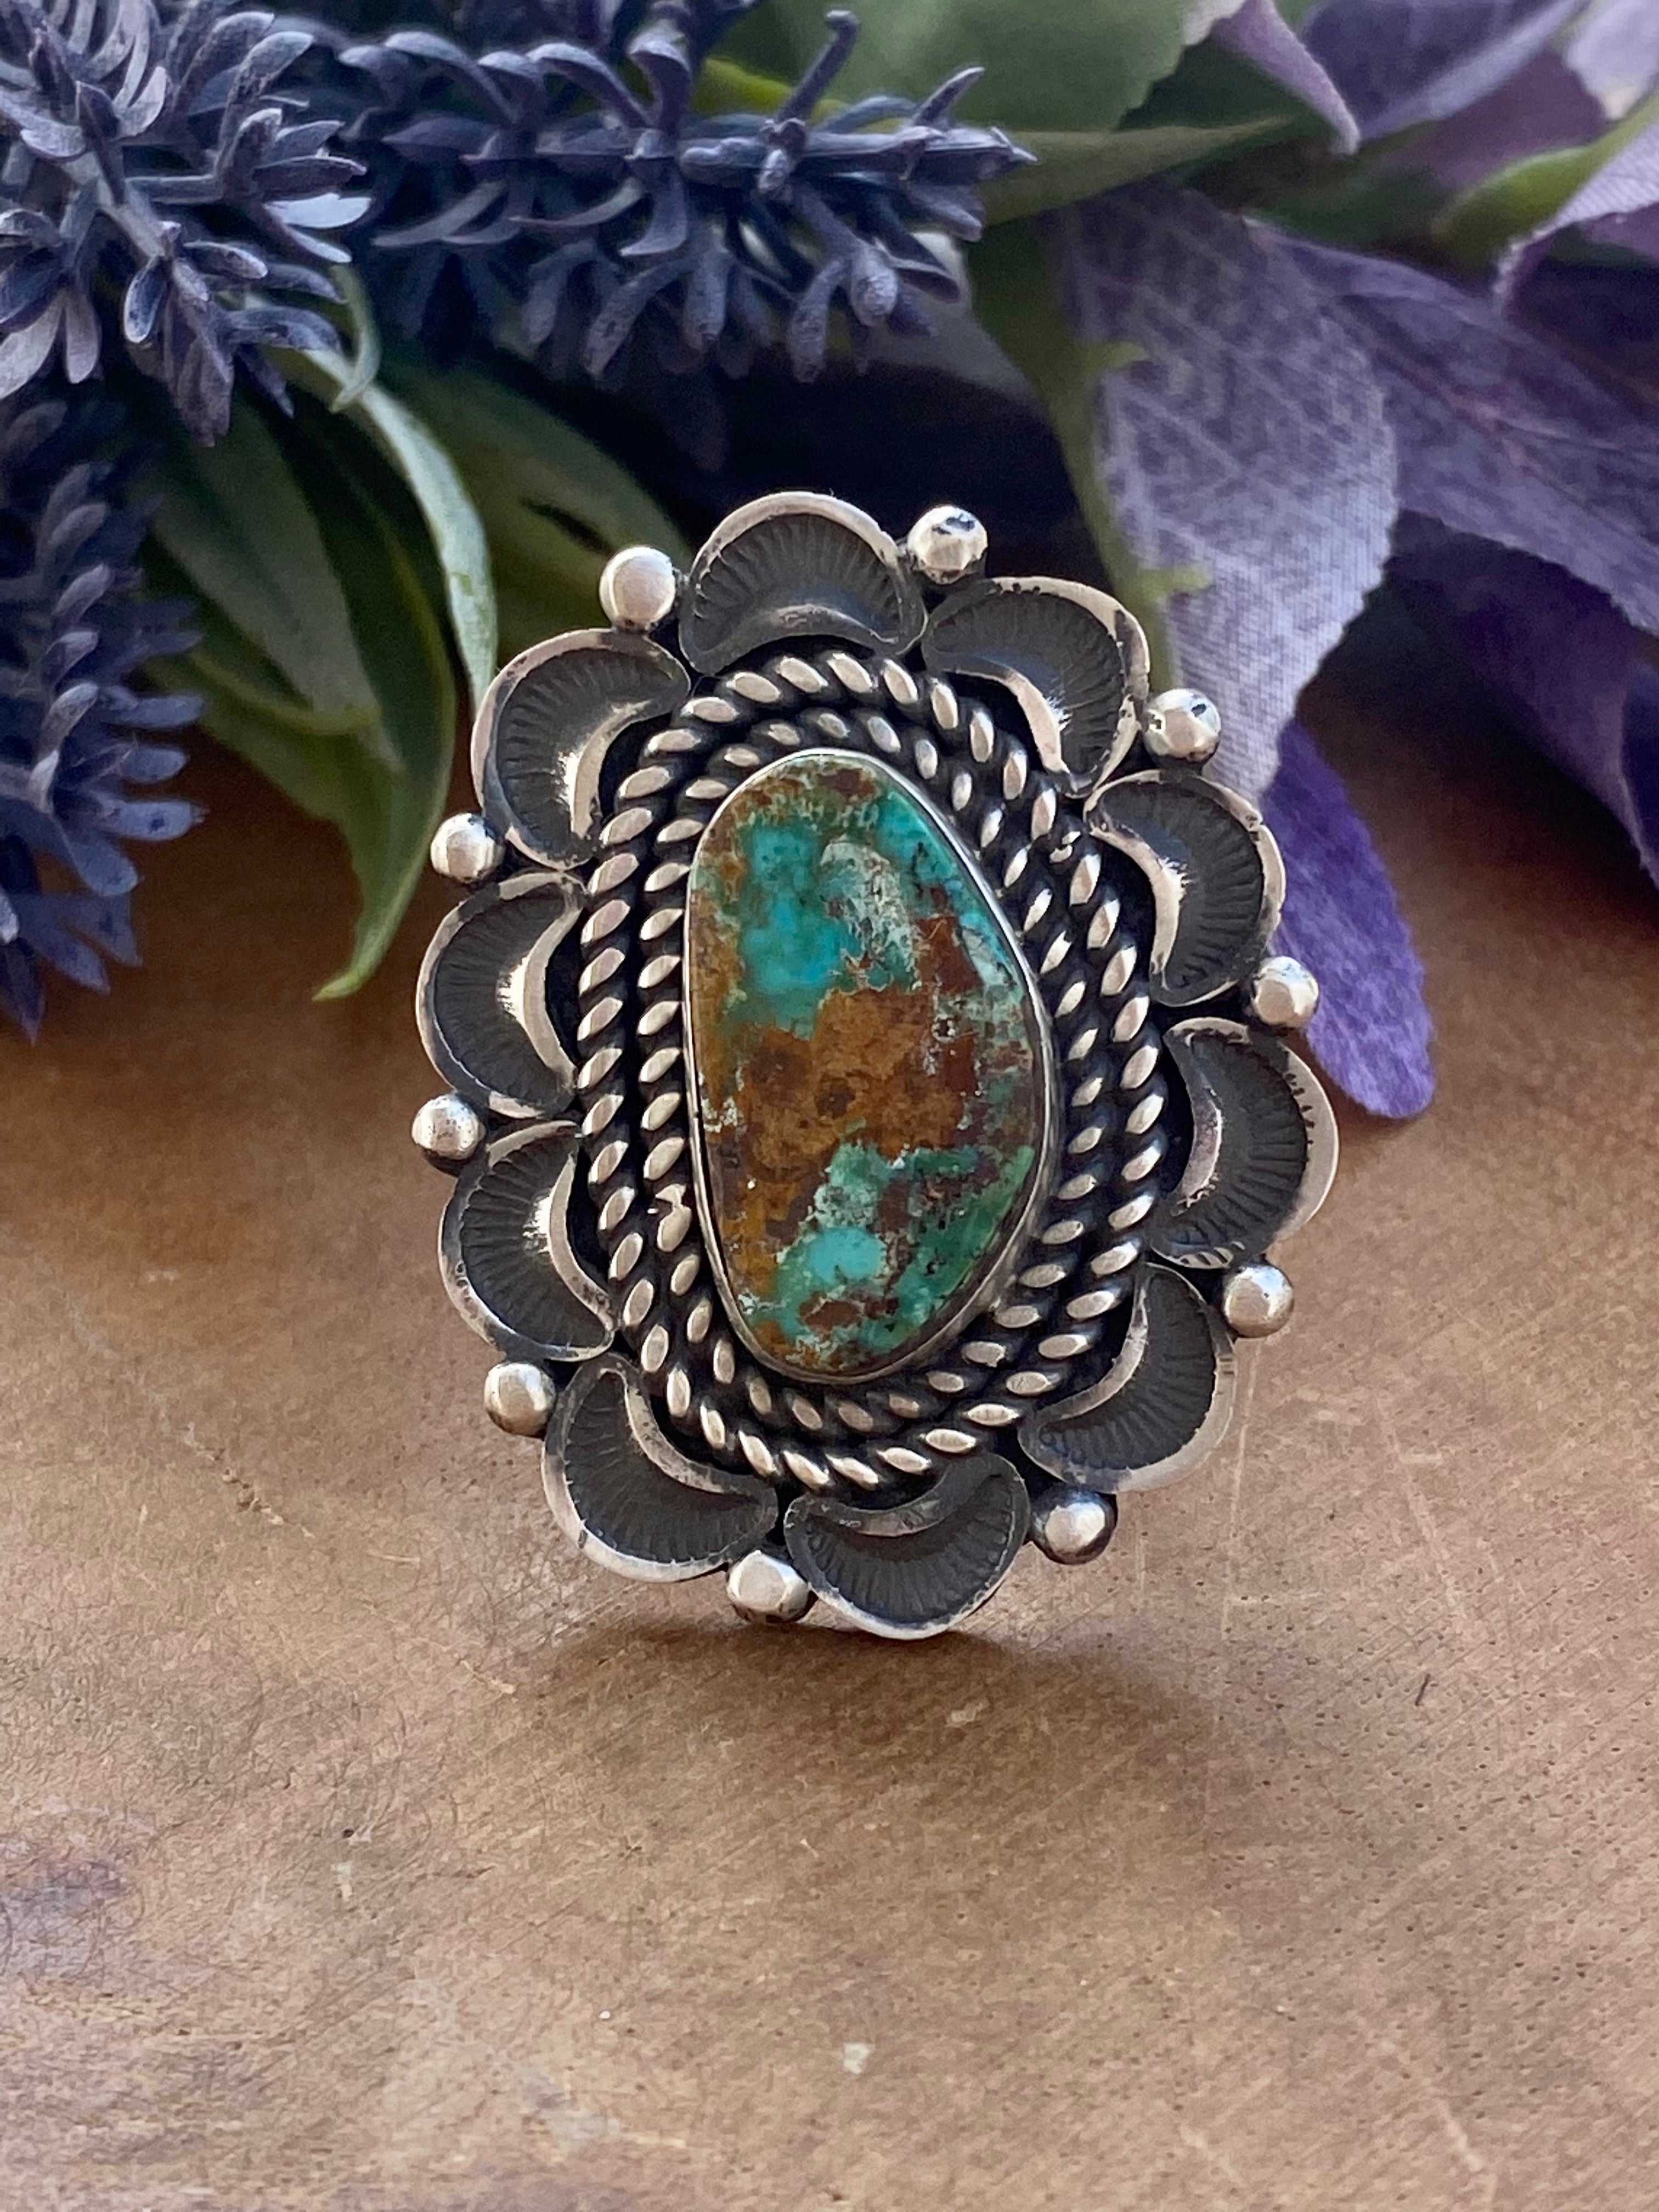 Alex Sanchez Kings Manassa Turquoise & Sterling Silver Ring Size 6.5